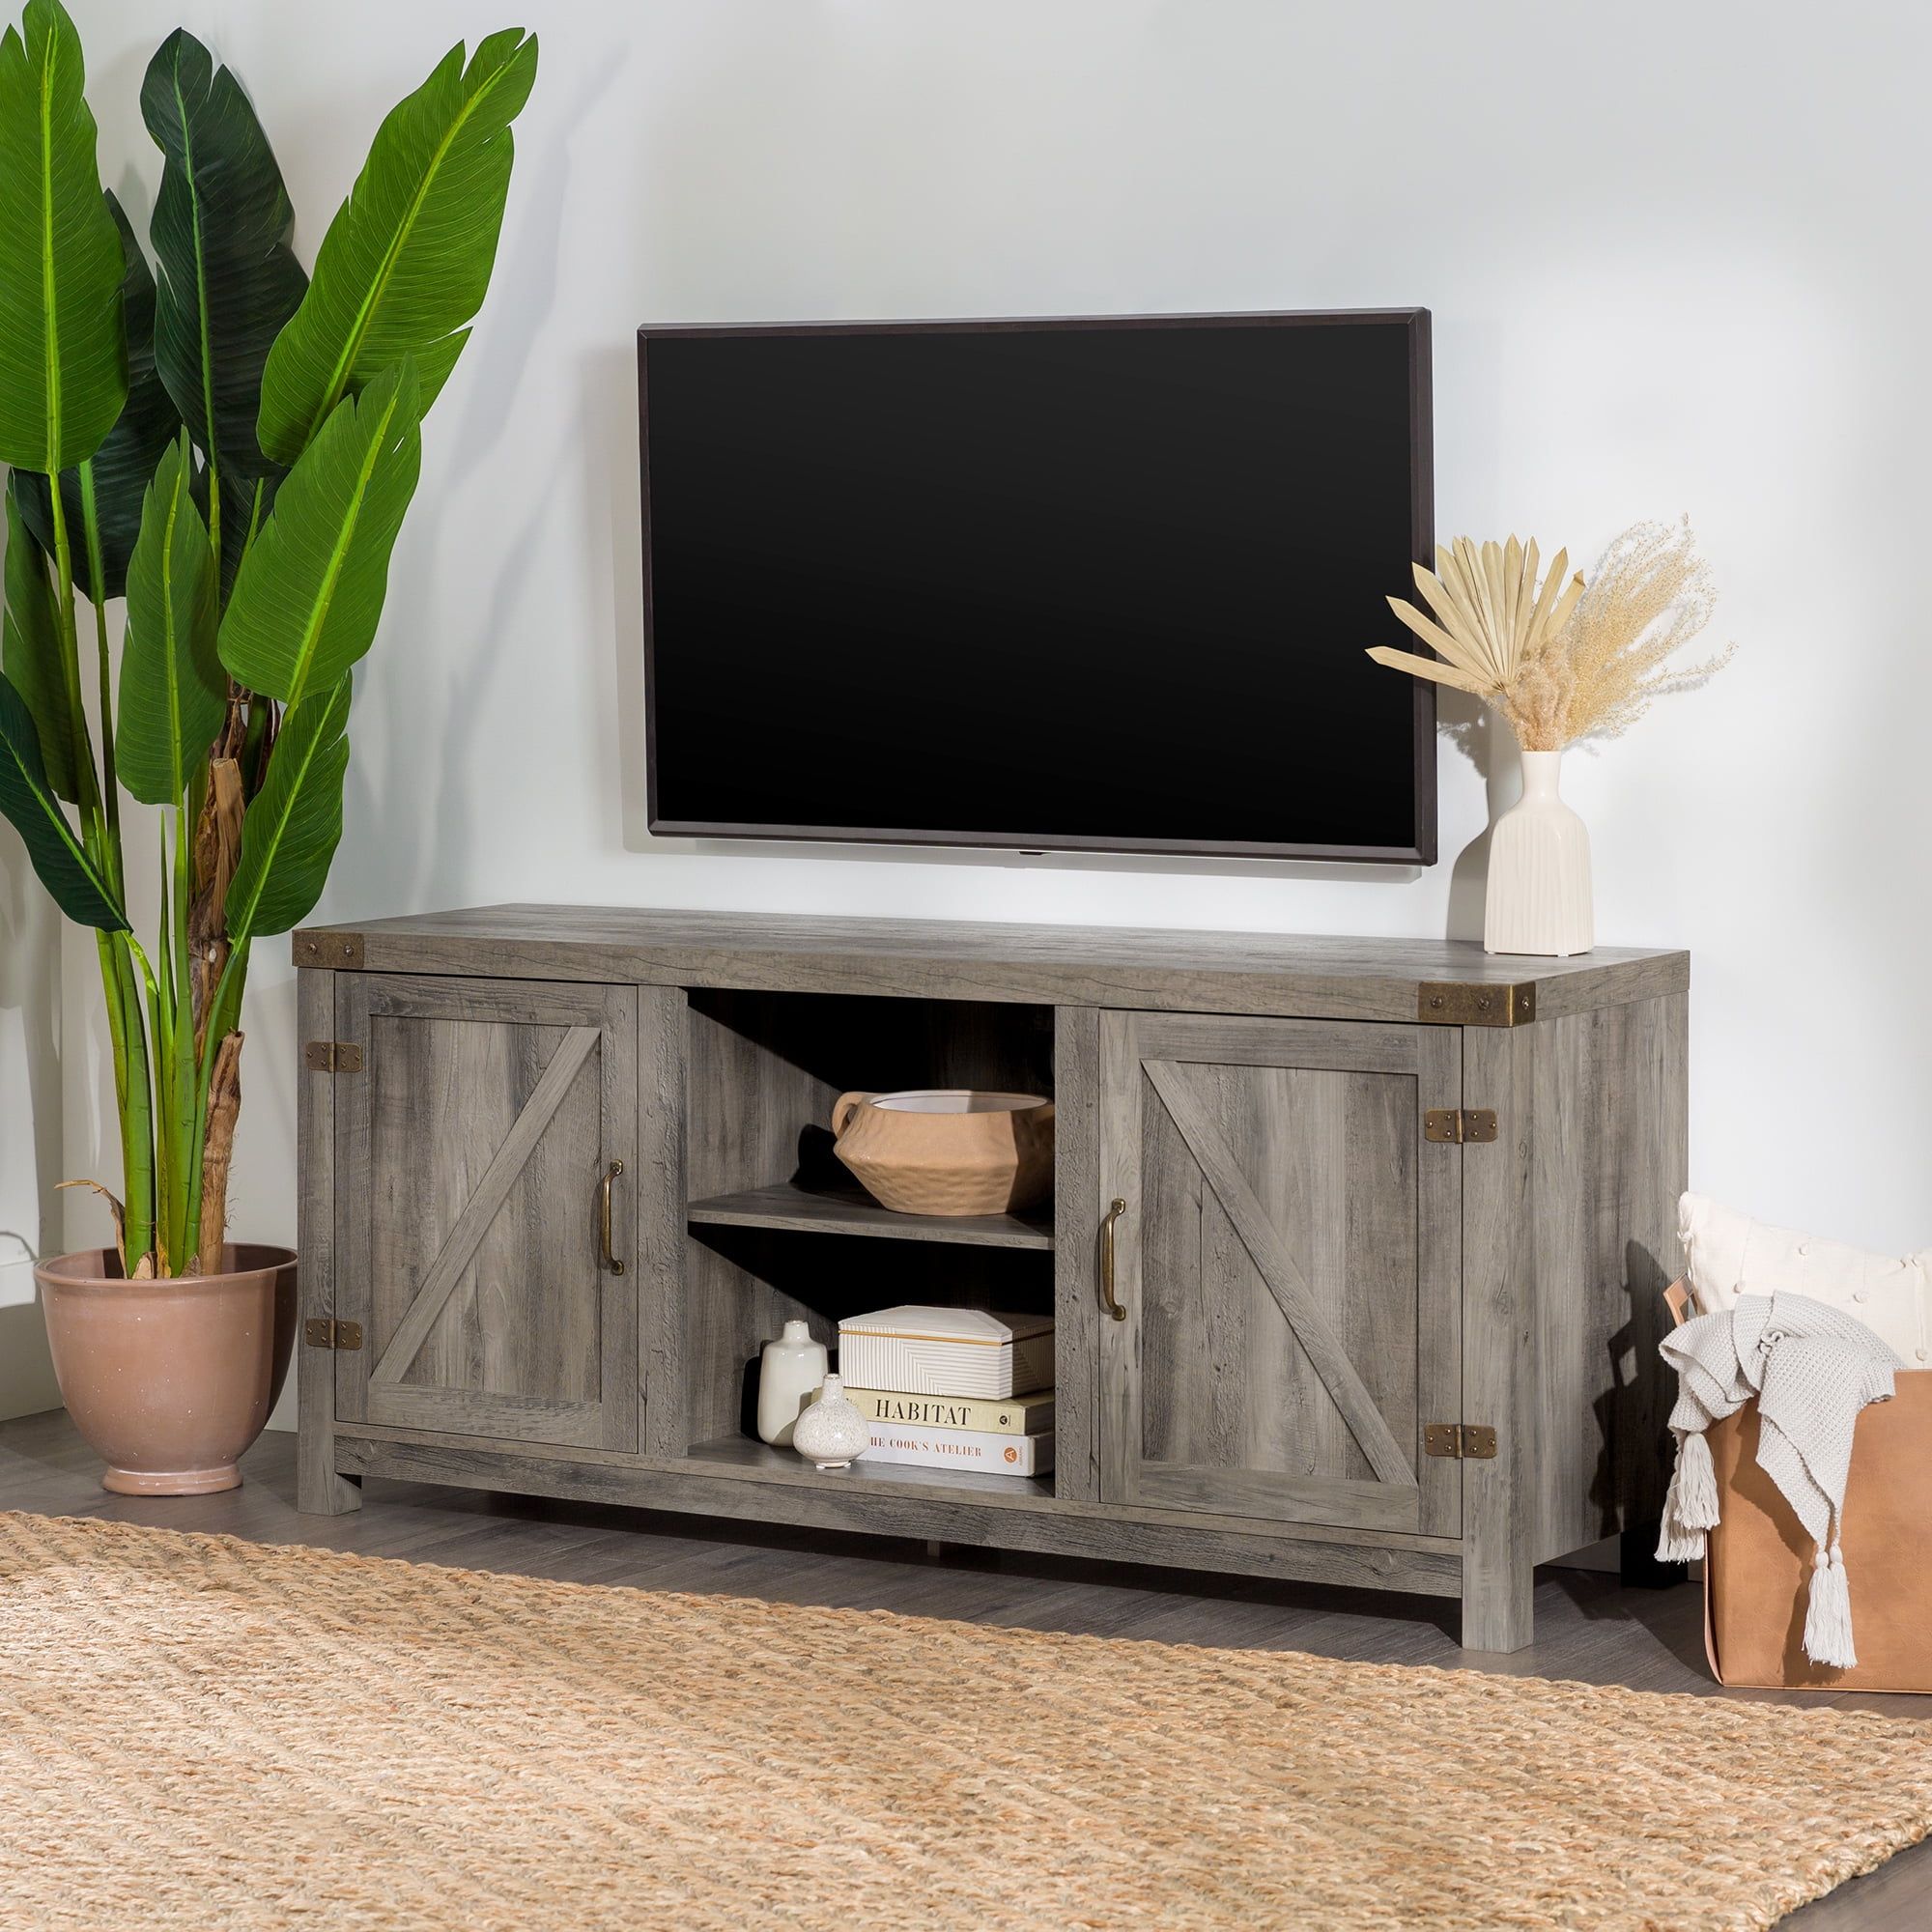 Woven Paths Modern Farmhouse Barn Door Tv Stand For Tvs Up To 65", Grey  Wash – Walmart Regarding Farmhouse Stands For Tvs (View 3 of 15)